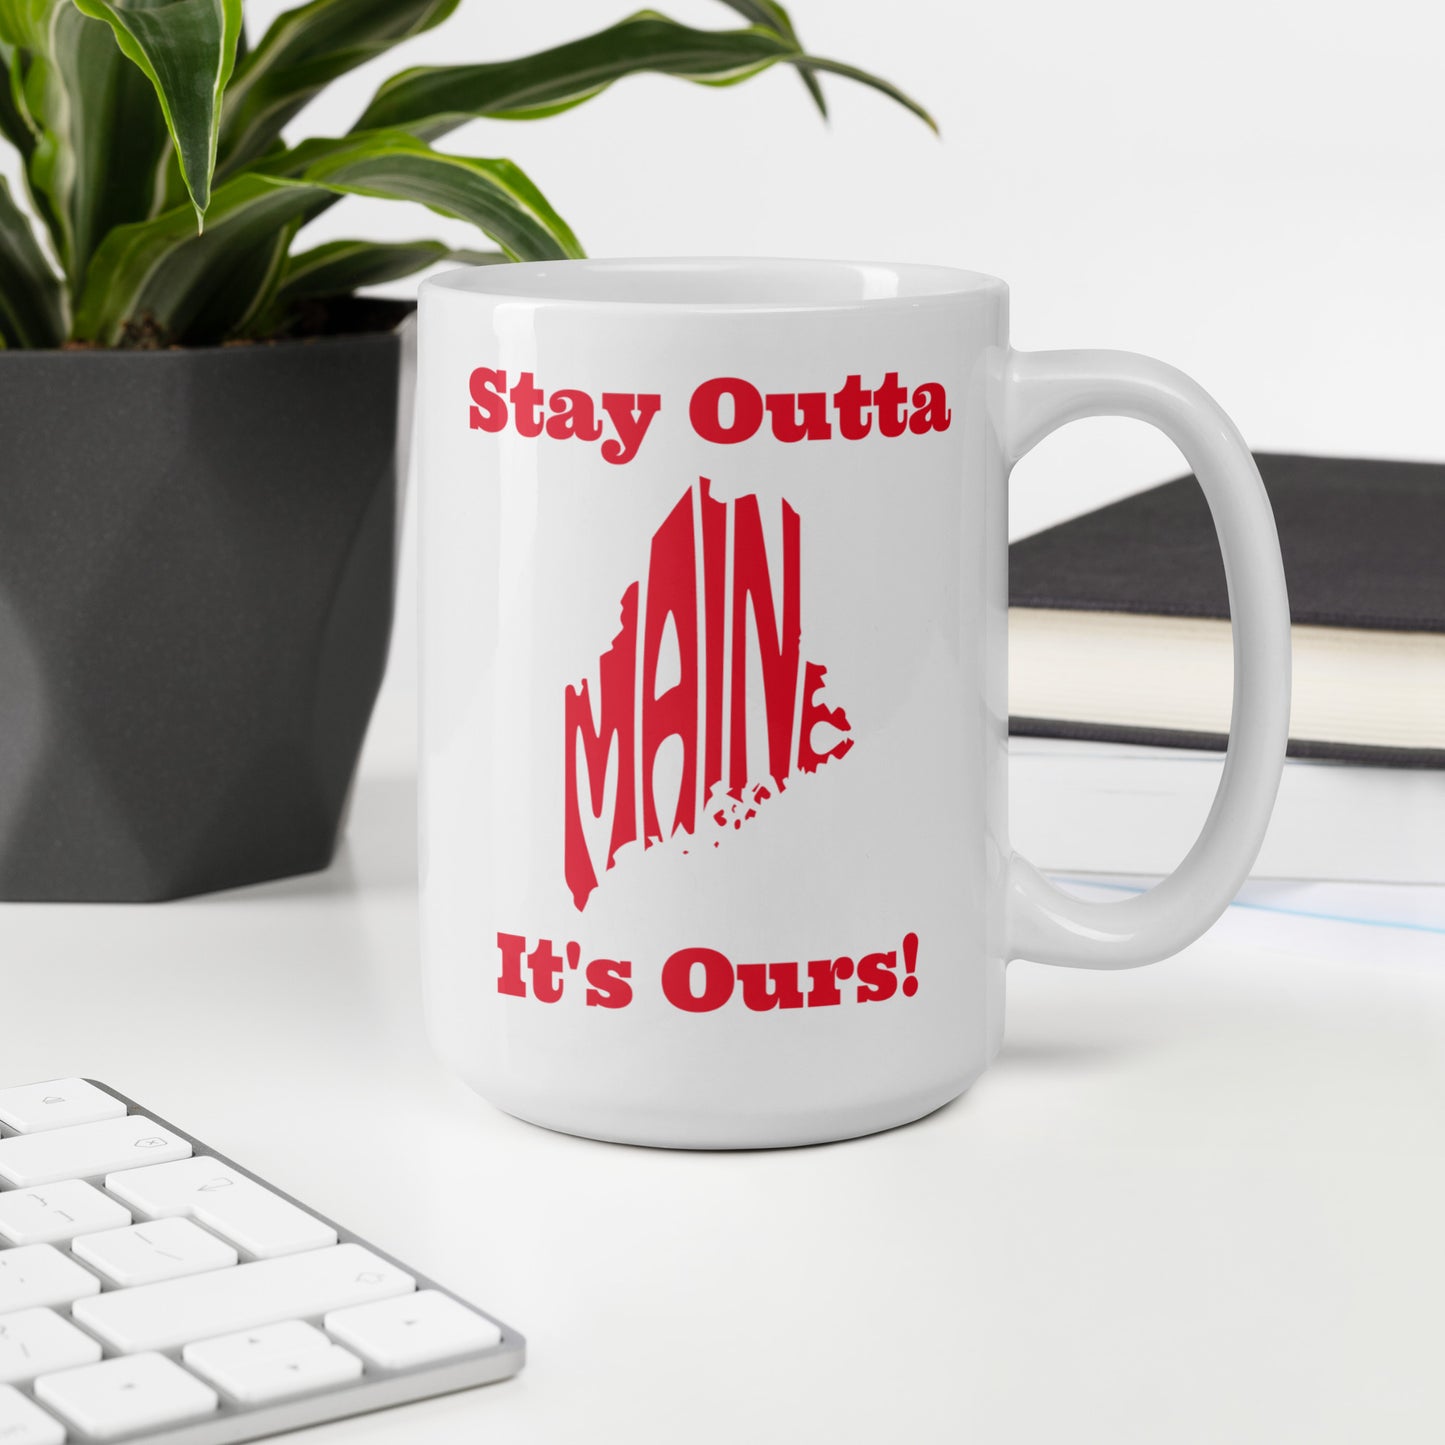 Stay Outta Maine - Red Font - White Glossy Mug